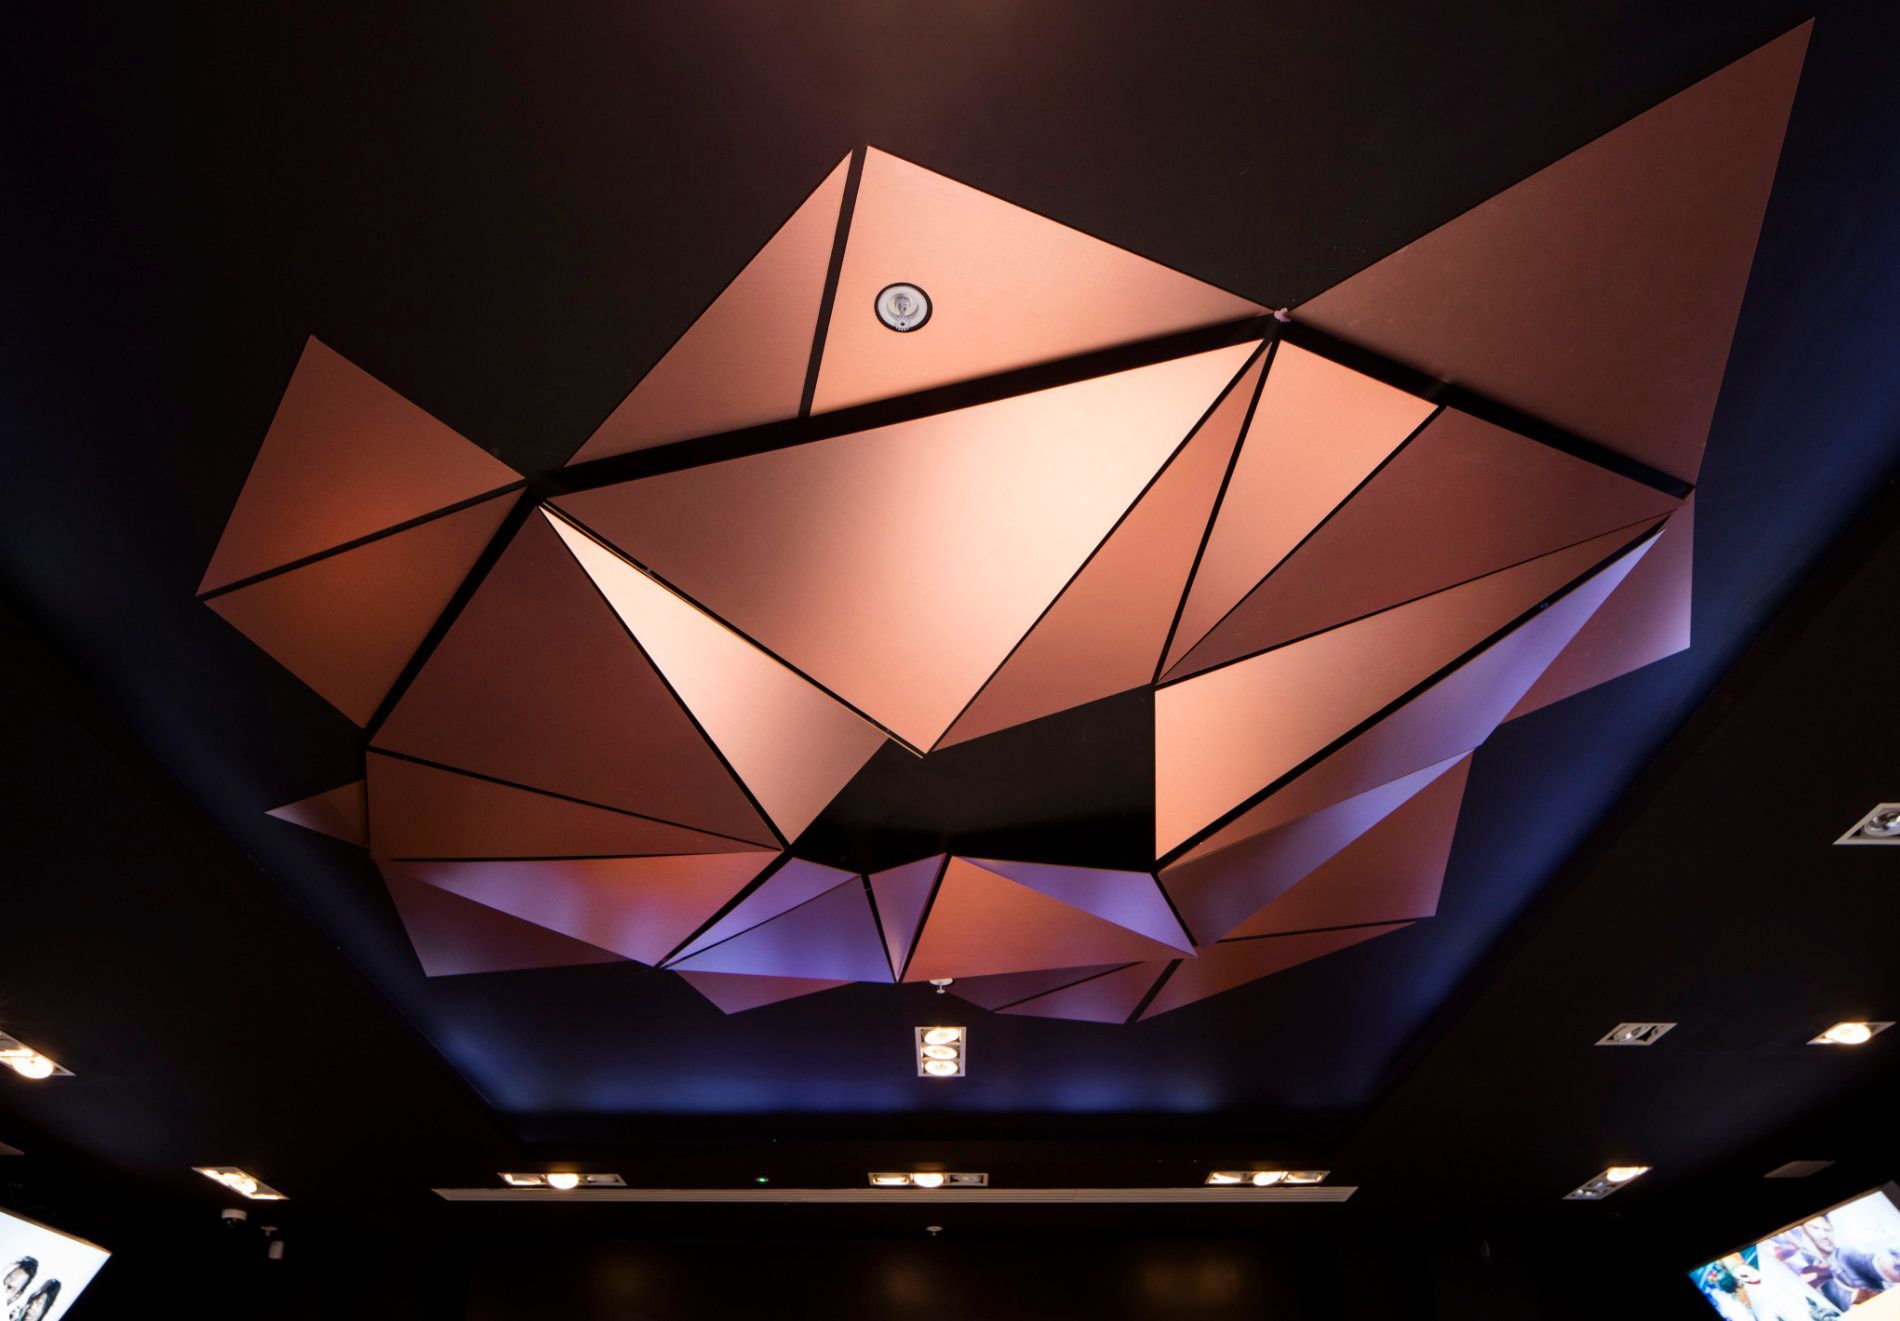 a ceiling with a geometric design made of triangles